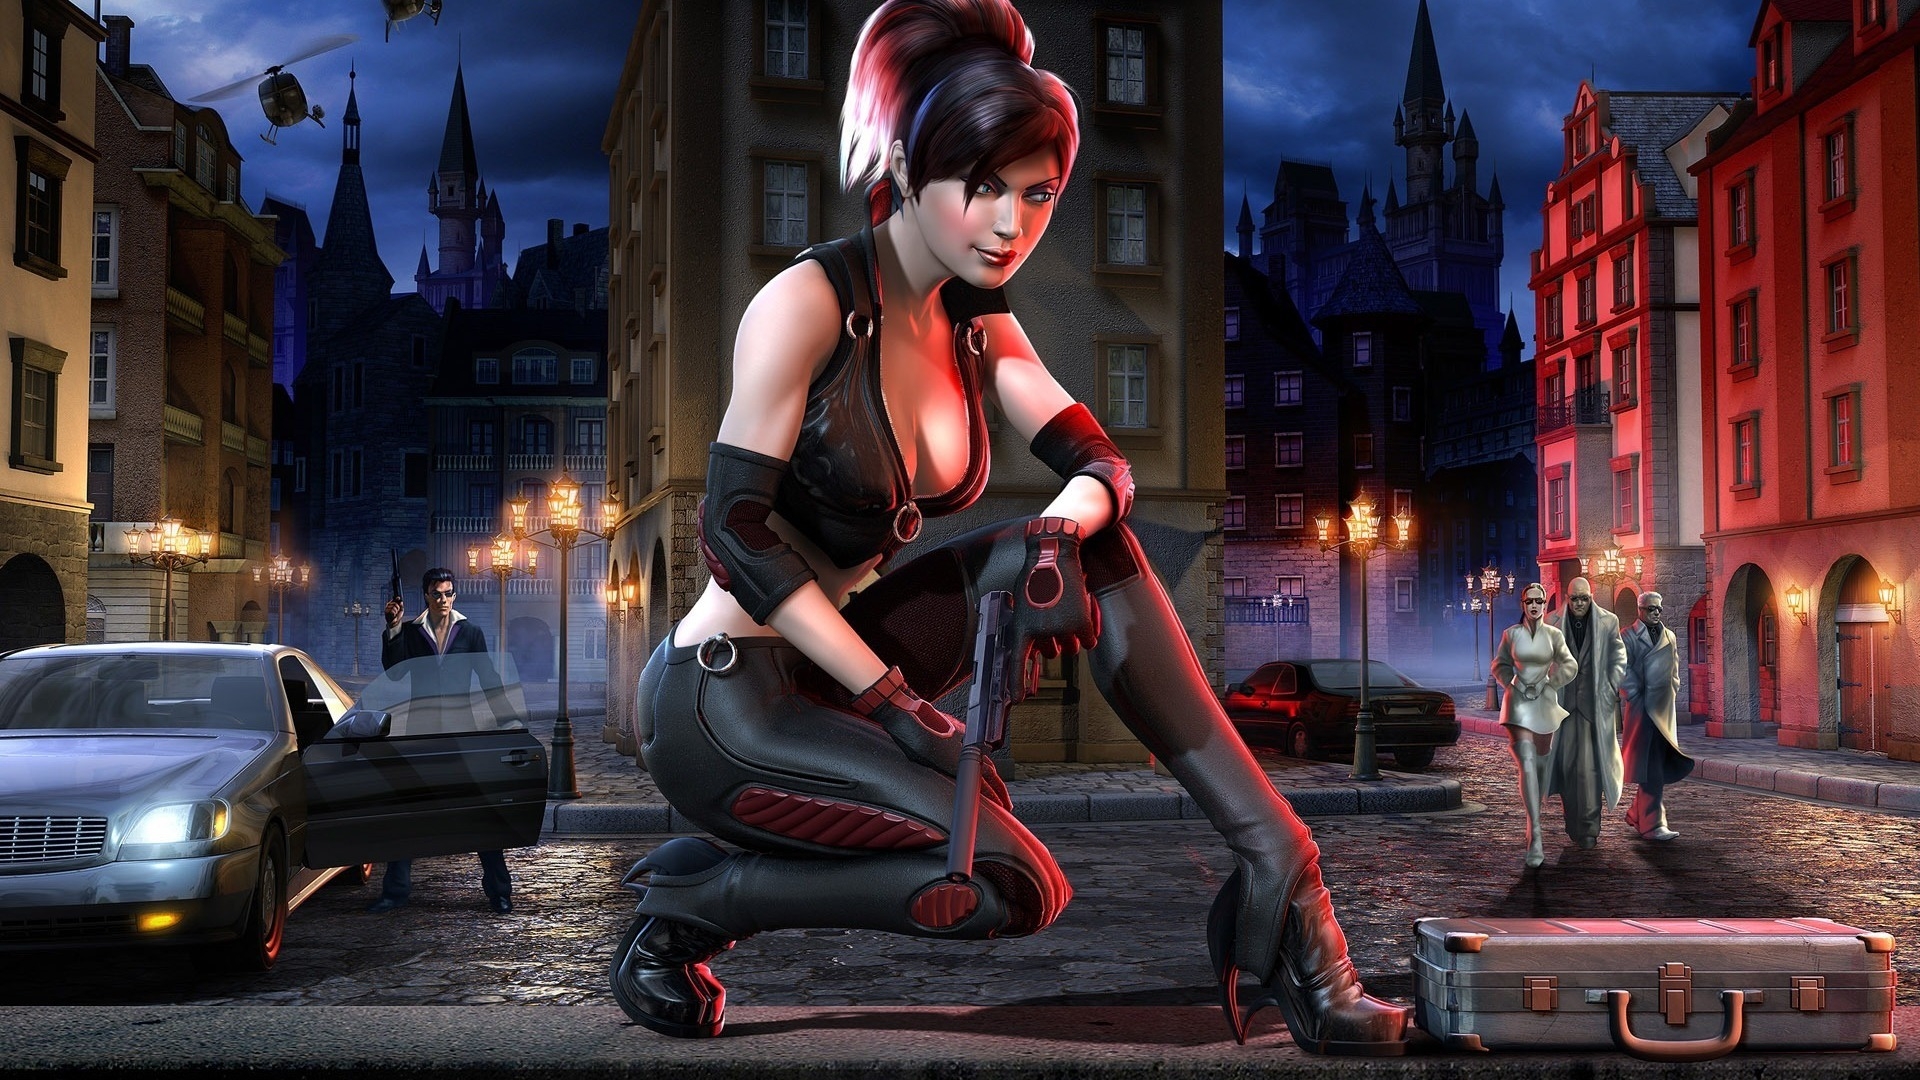 BloodRayne Character for 1920 x 1080 HDTV 1080p resolution